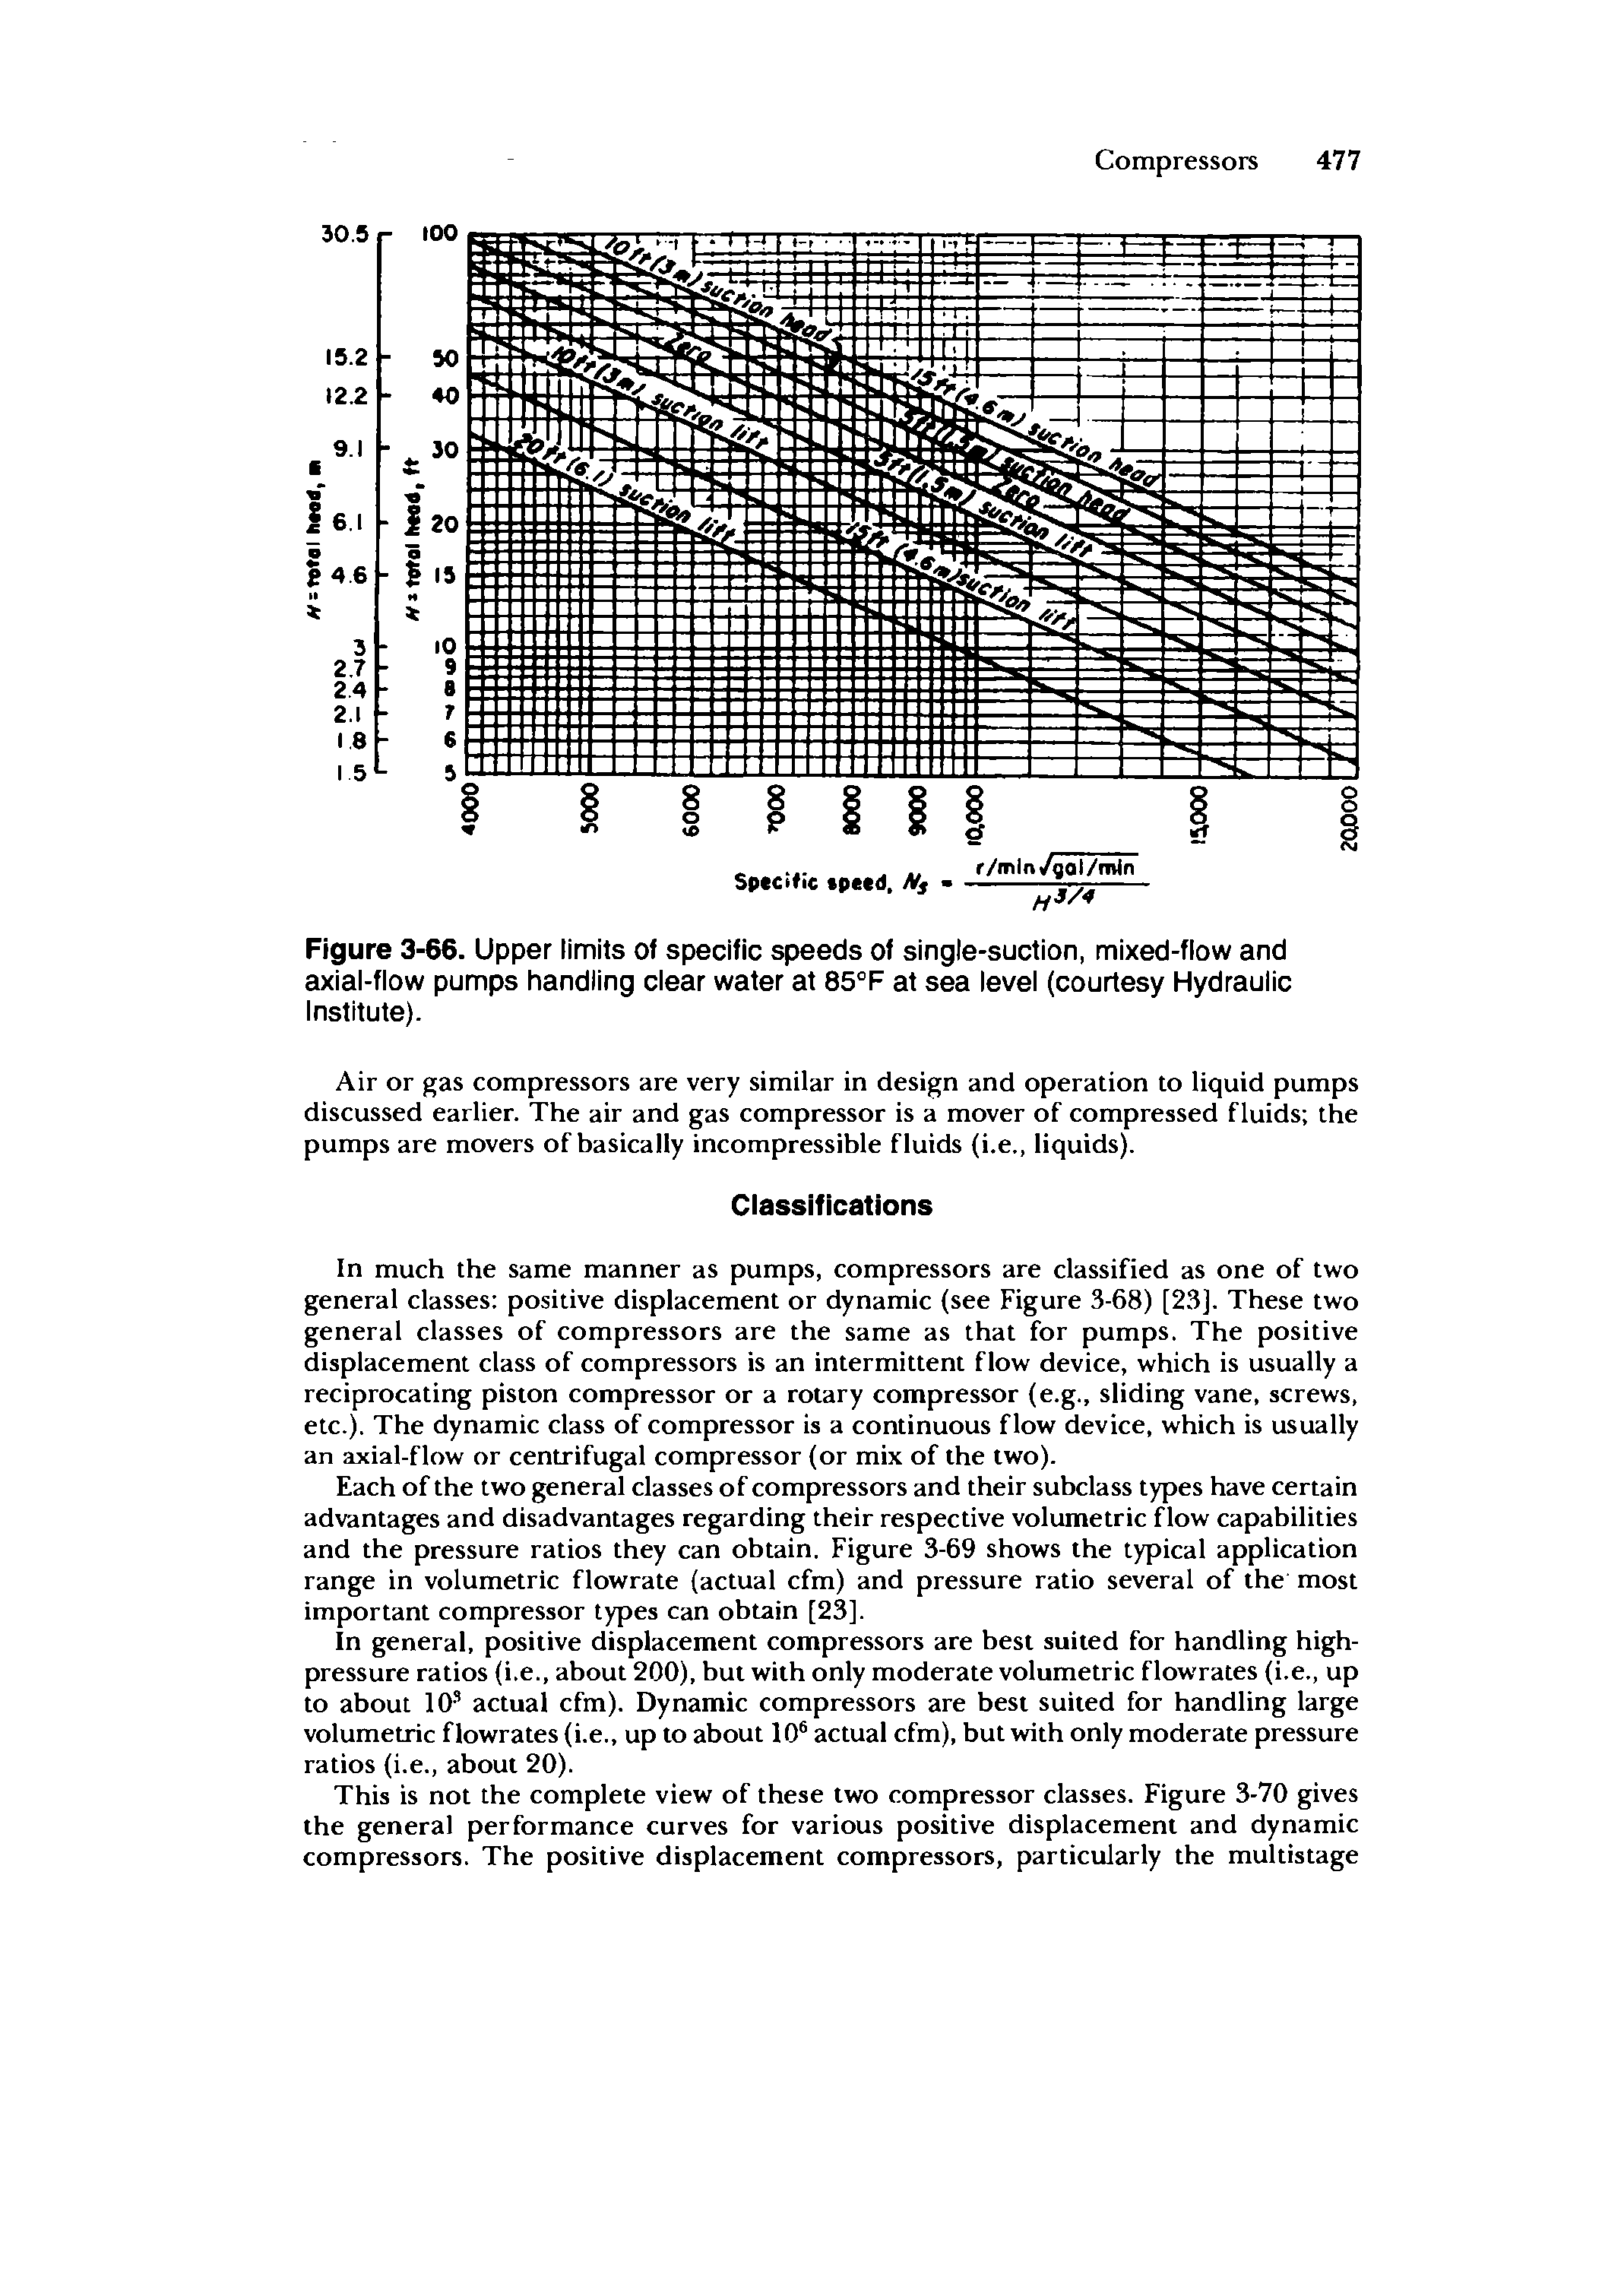 Figure 3-66. Upper limits of specific speeds of single-suction, mixed-flow and axial-flow pumps handling ciear water at 85°F at sea levei (courtesy Hydraulic institute).